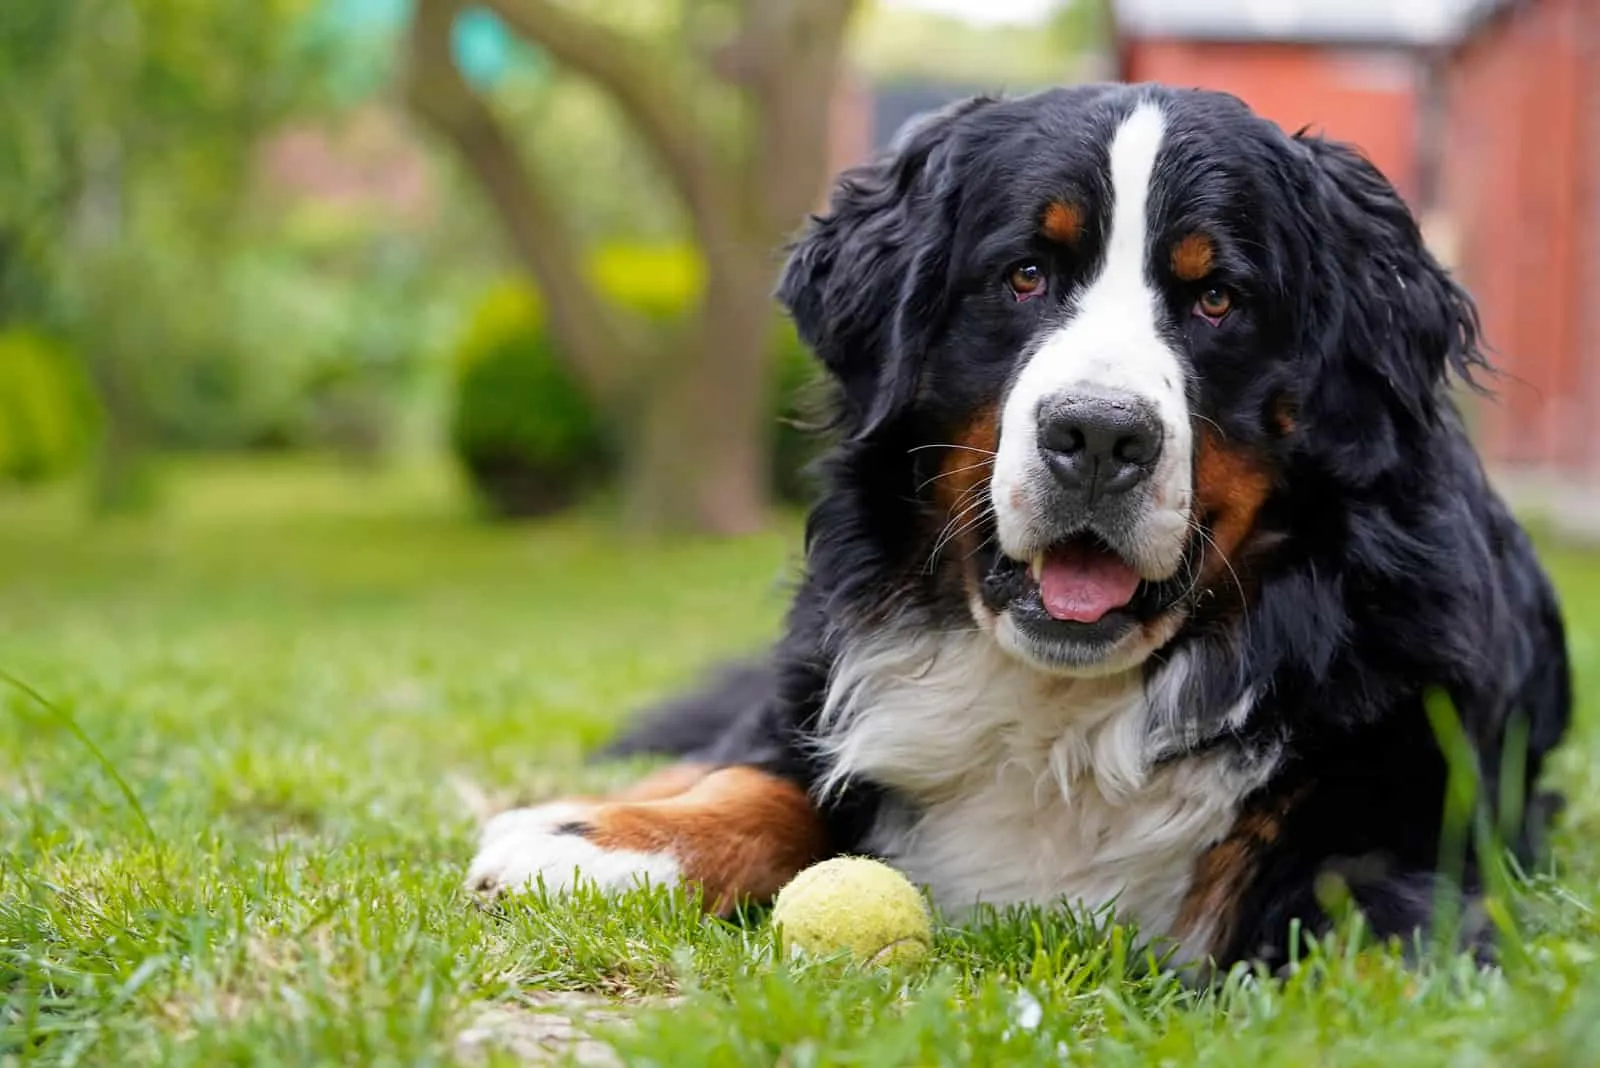 Bernese Mountain Dog lying on the grass in the garden